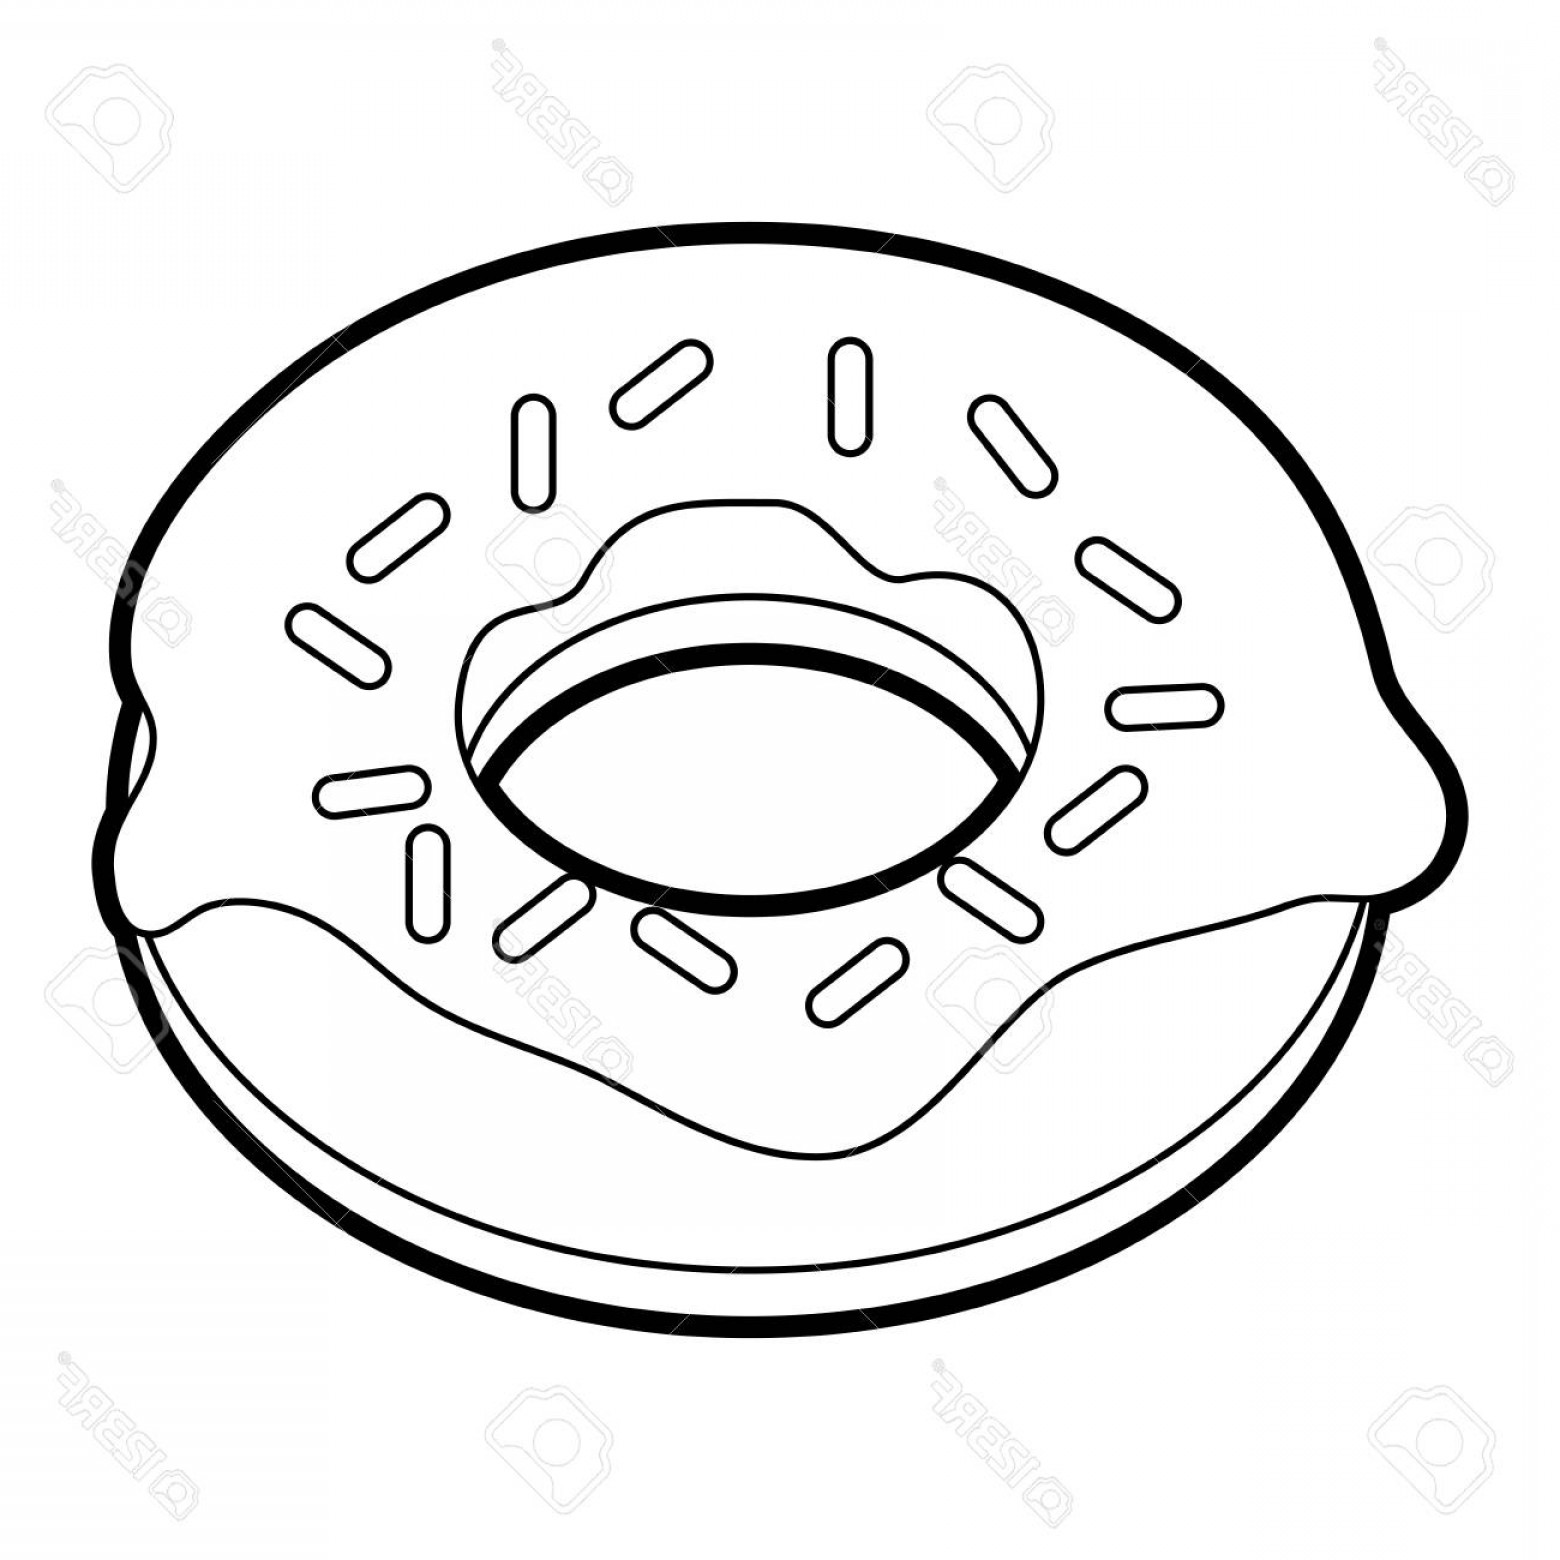 Donut Line Drawing | Free download on ClipArtMag